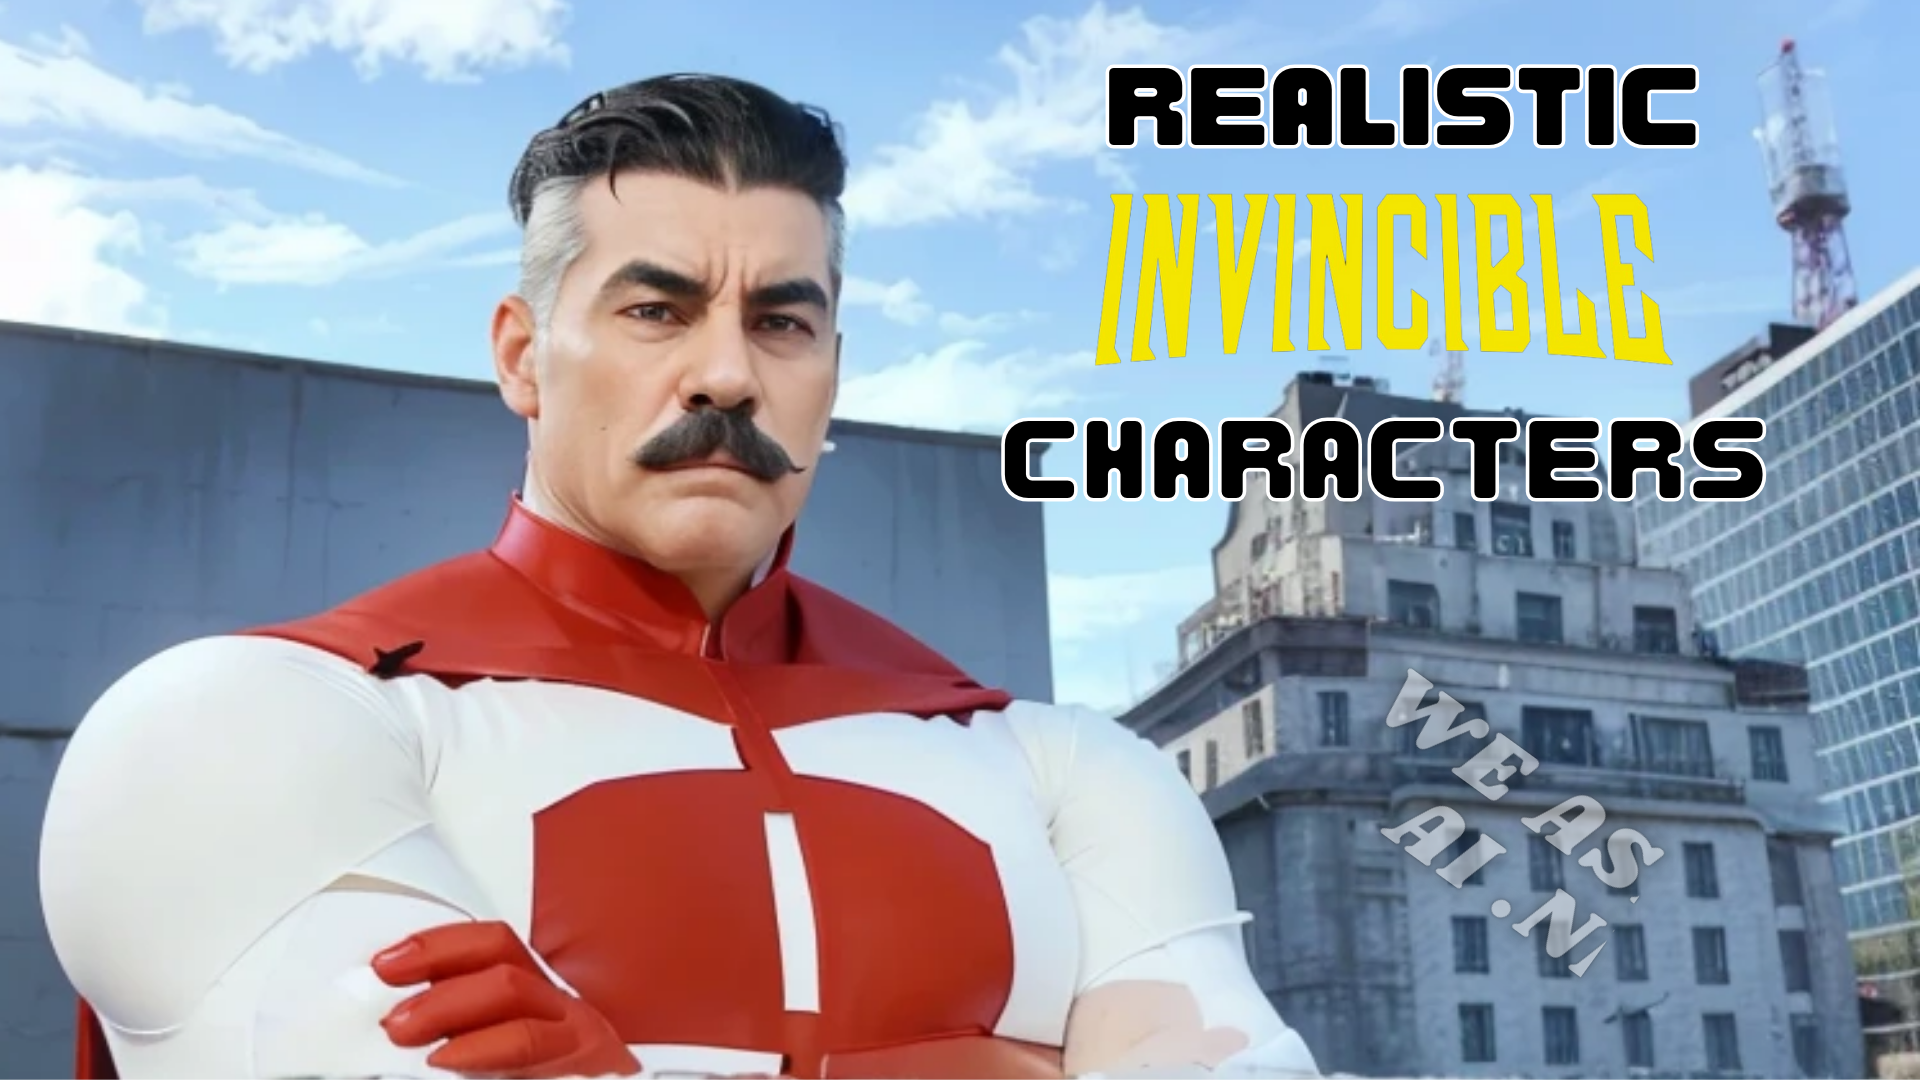 Realistic Invincible Characters.